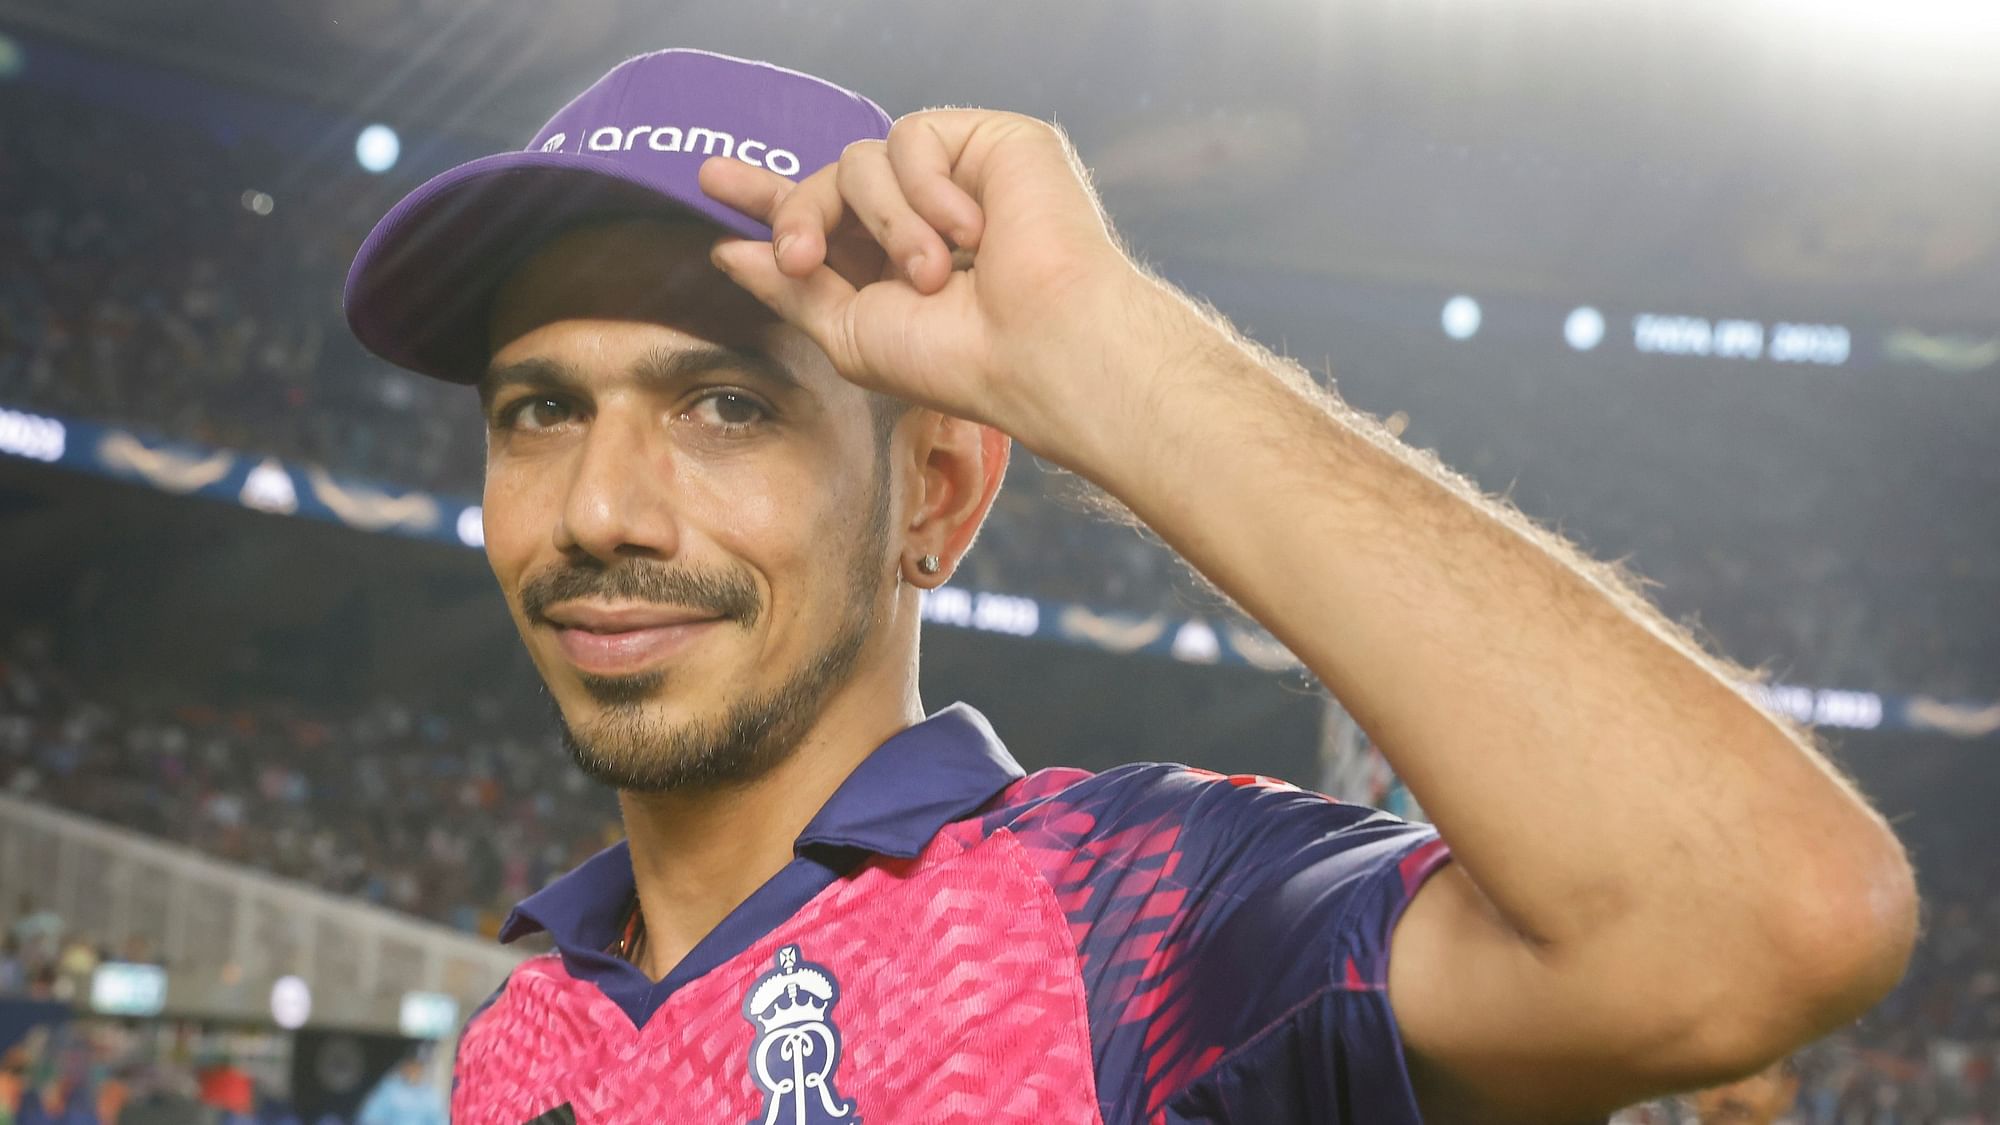 <div class="paragraphs"><p>Yuzvendra Chahal became IPL's highest wicket-taker, with his four wicket haul against KKR on 11 May.</p></div>